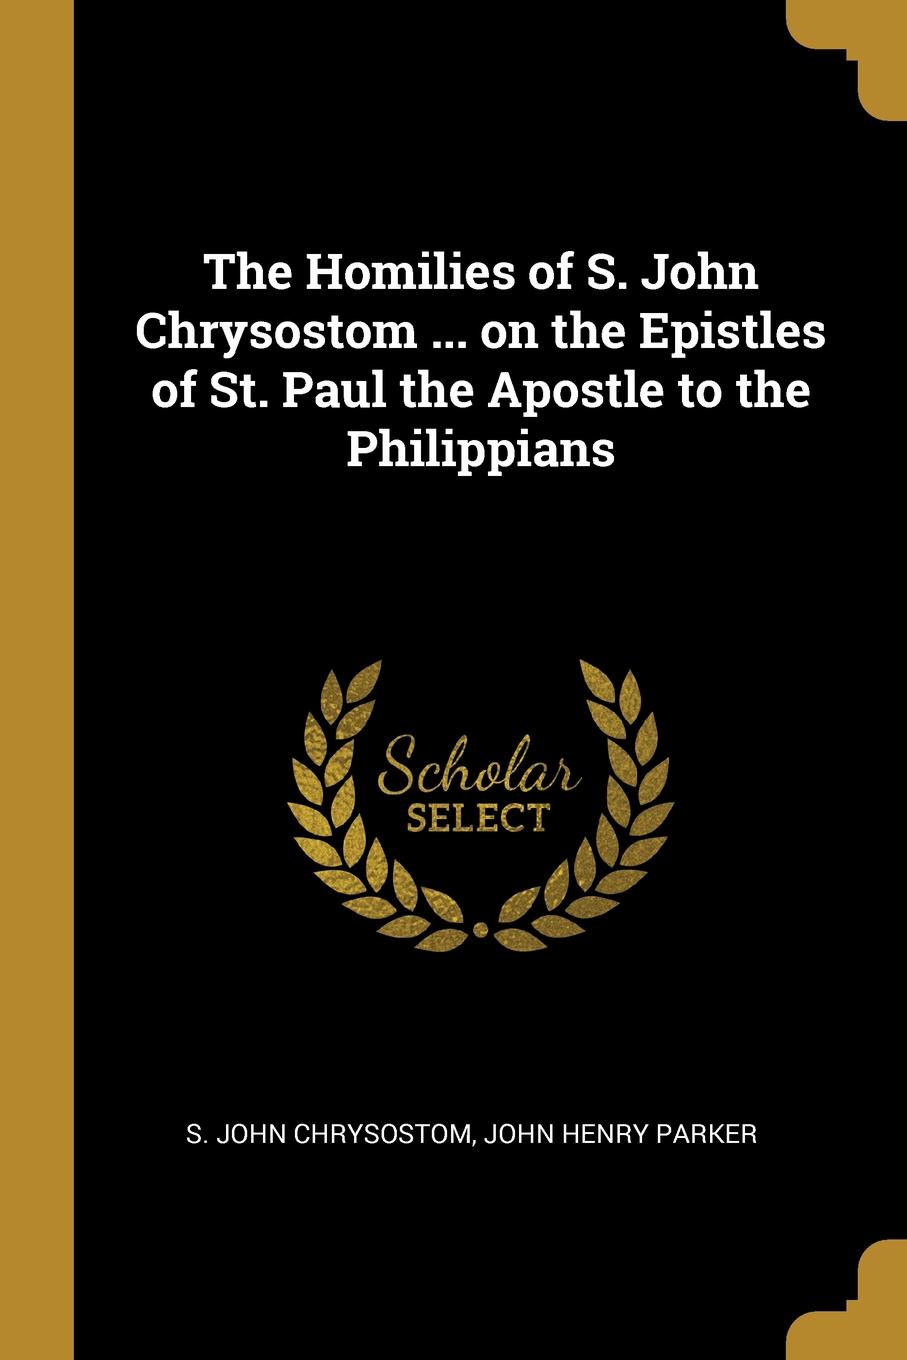 The Homilies of S. John Chrysostom ... on the Epistles of St. Paul the Apostle to the Philippians